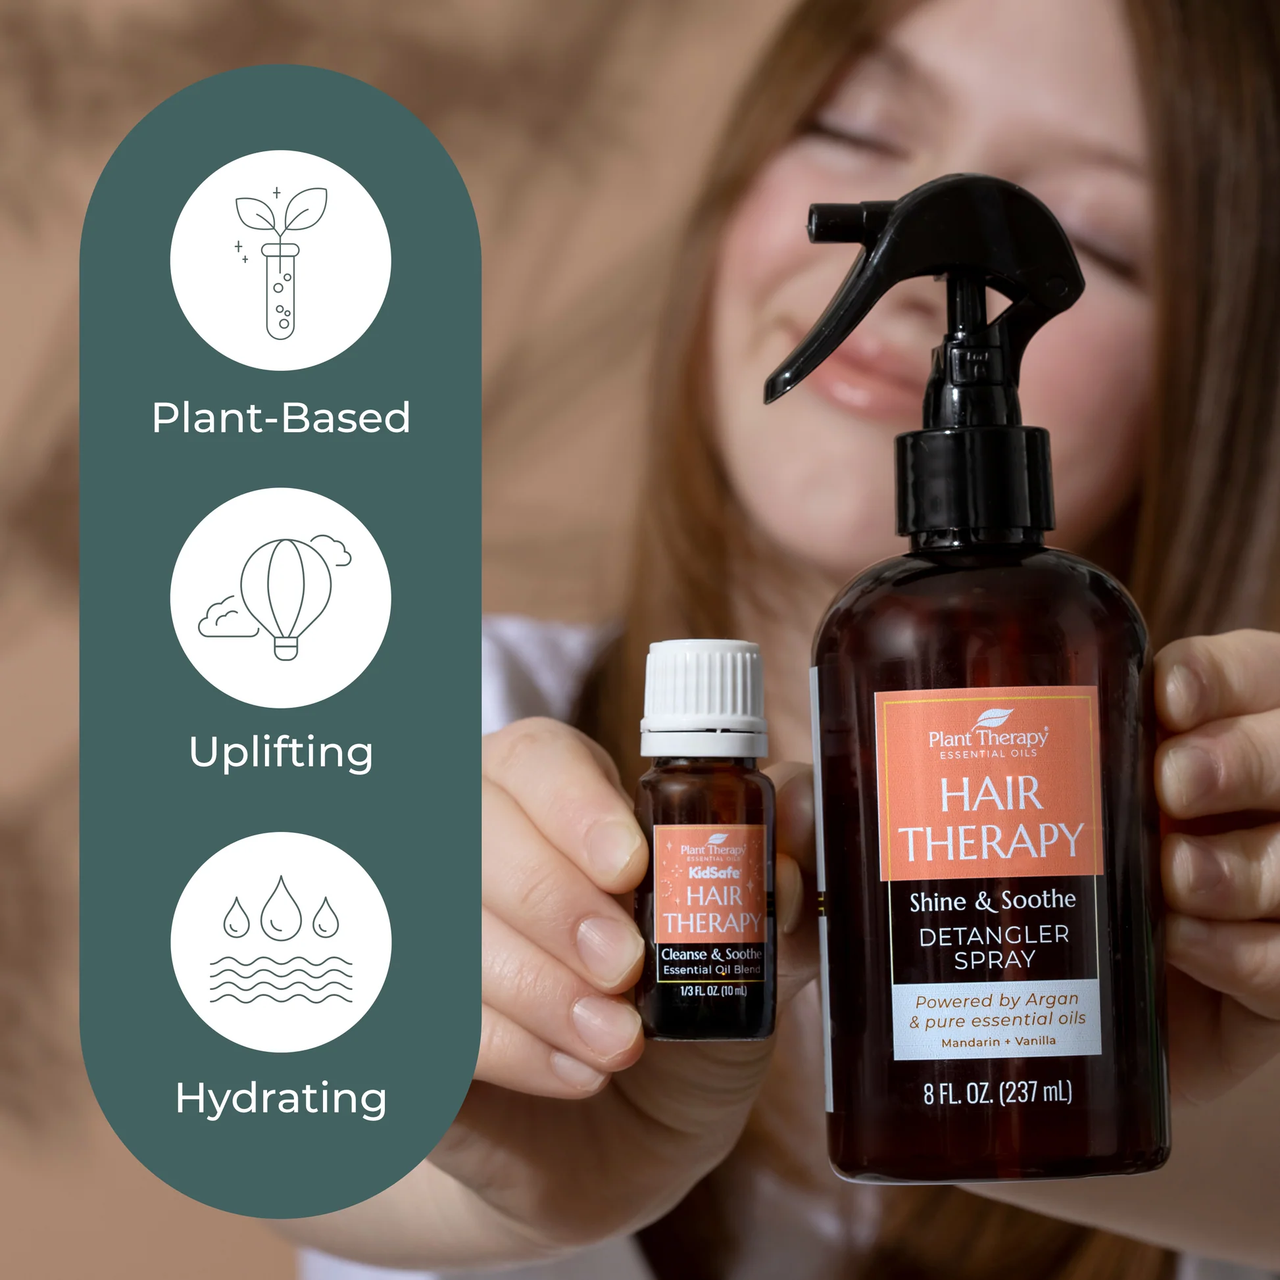 Hair Therapy Shine & Soothe Detangler Spray - Plant Therapy